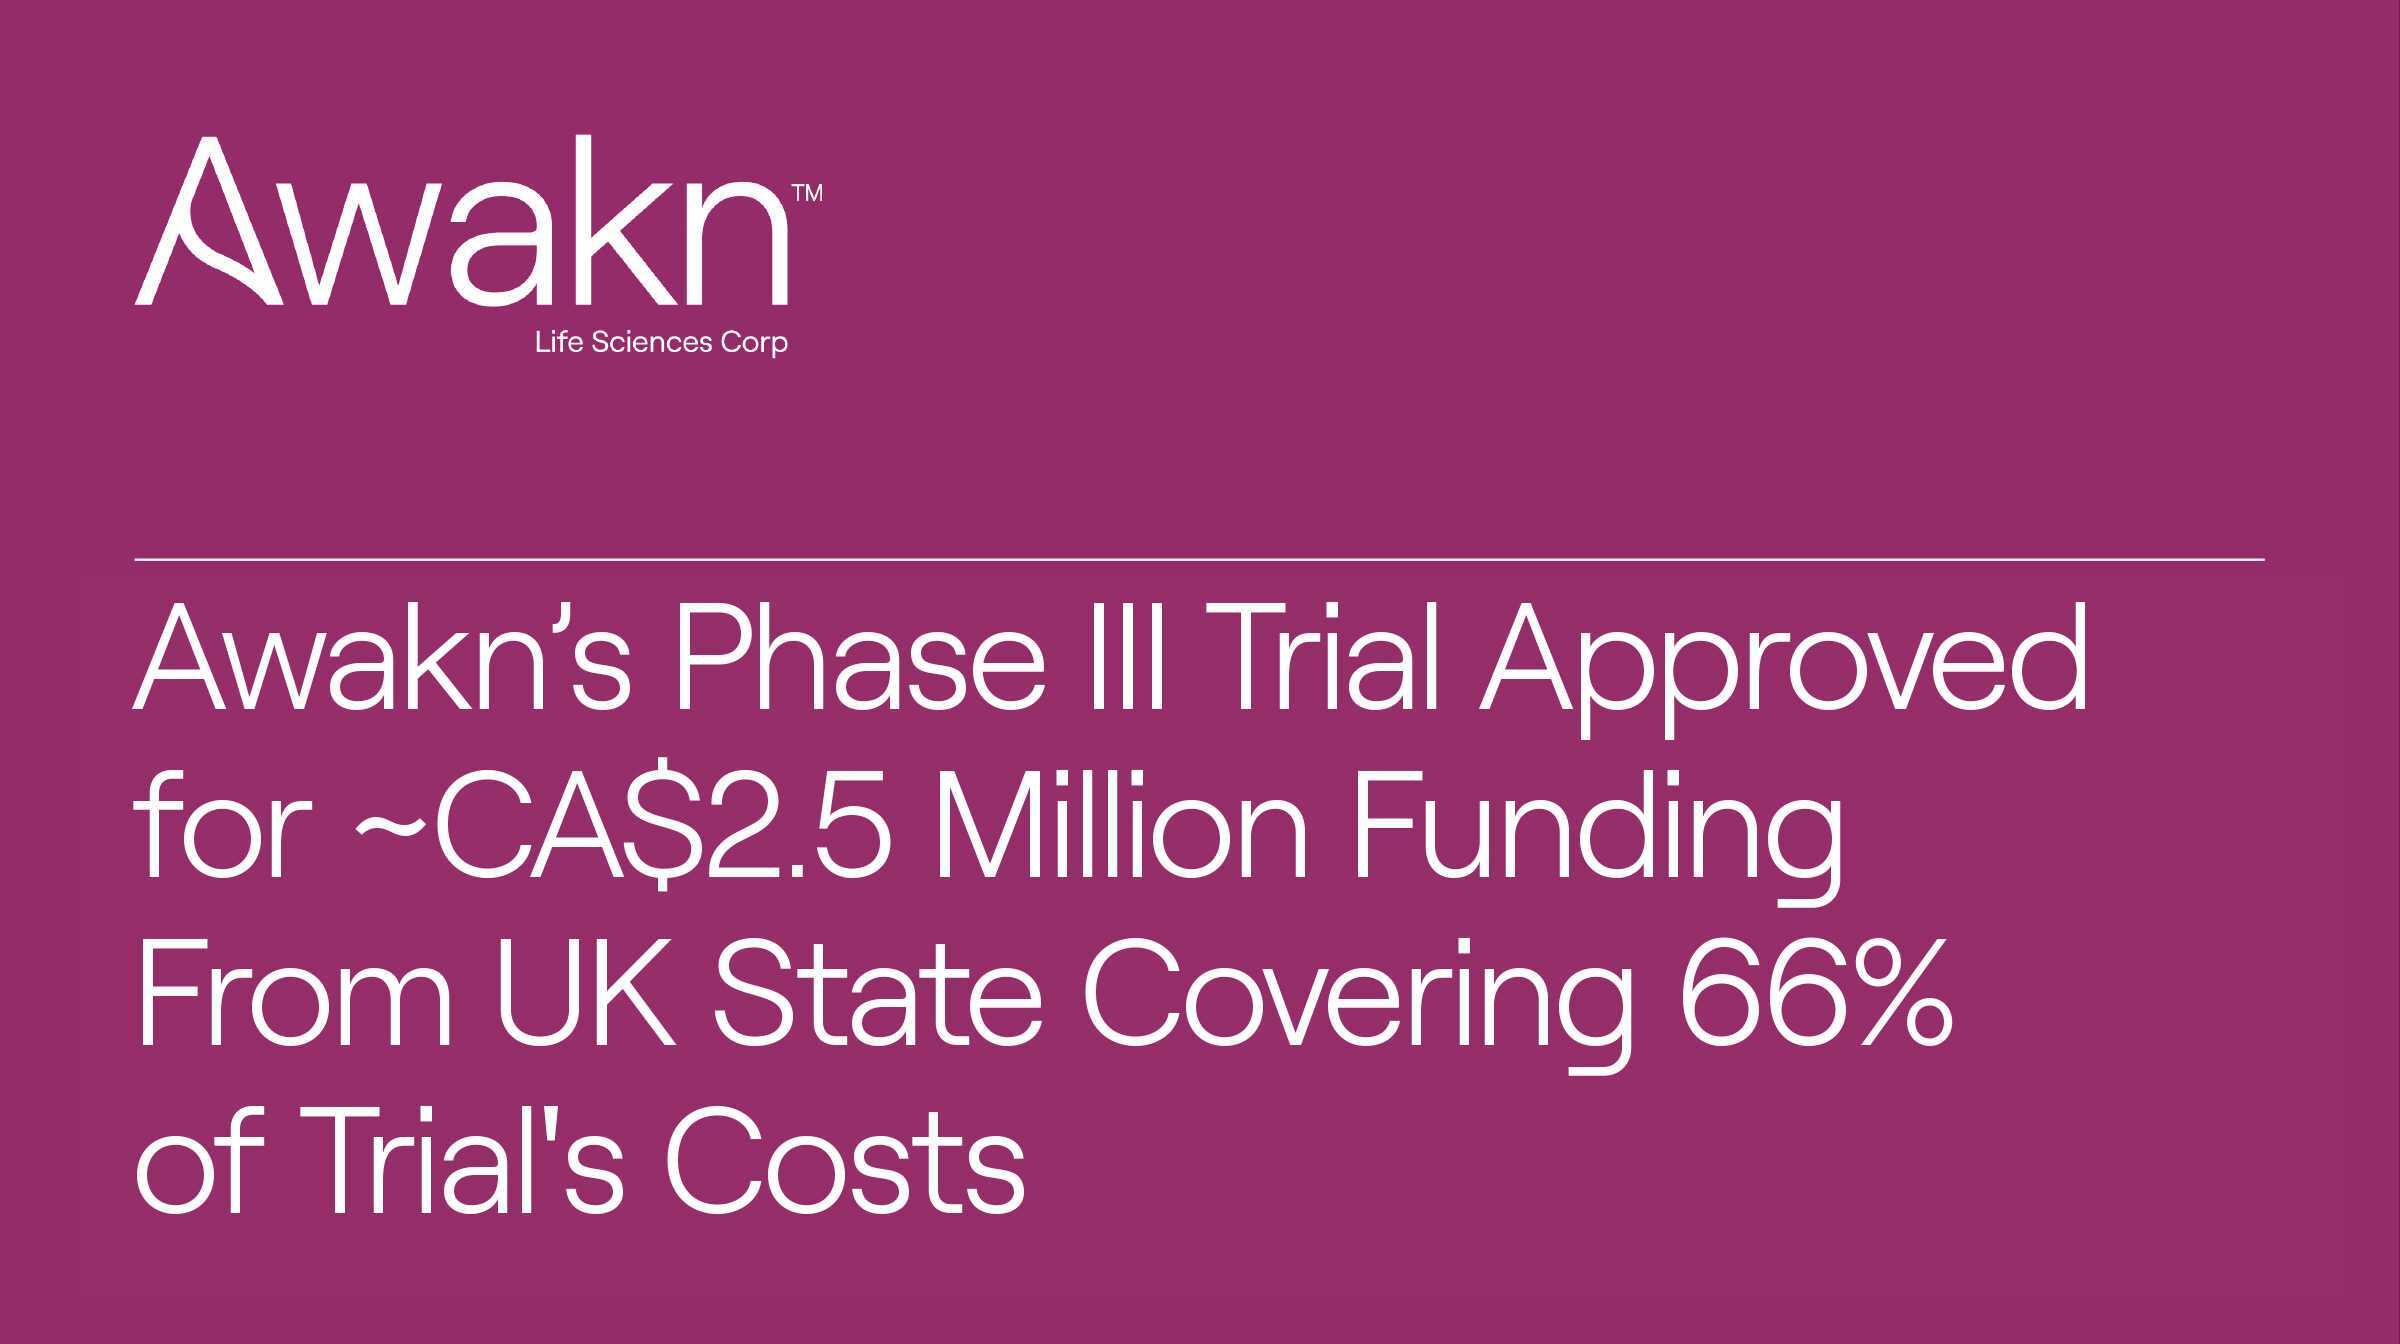 Awakn’s Phase III Trial Approved for ~CA$2.5 Million Funding From UK State Covering 66% of Trial's Costs